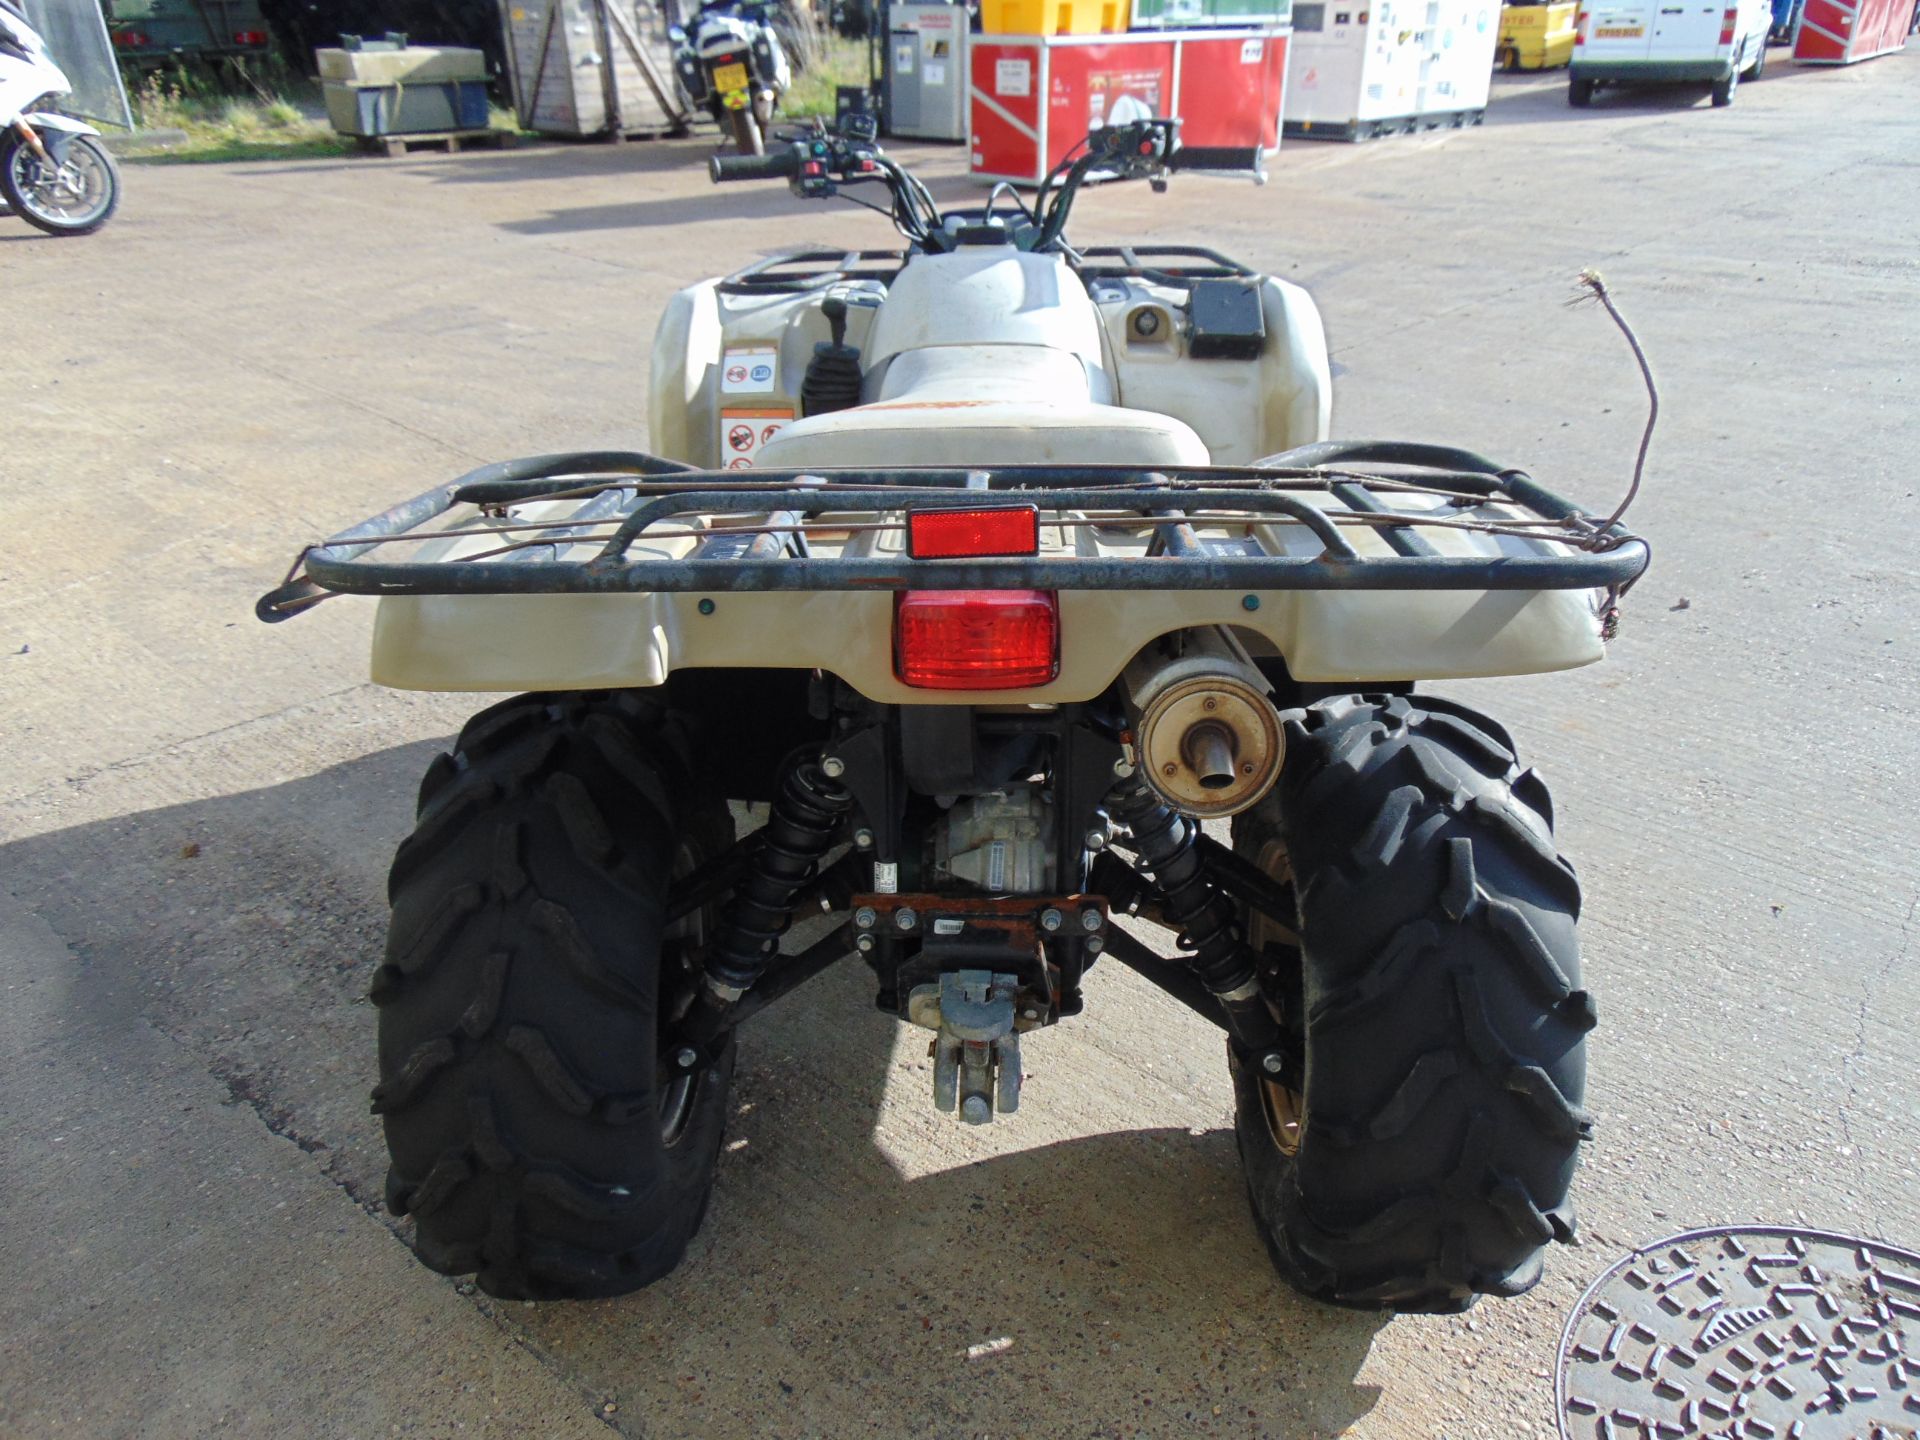 Recent Release Military Specification Yamaha Grizzly 450 4 x 4 ATV Quad Bike - Image 7 of 15